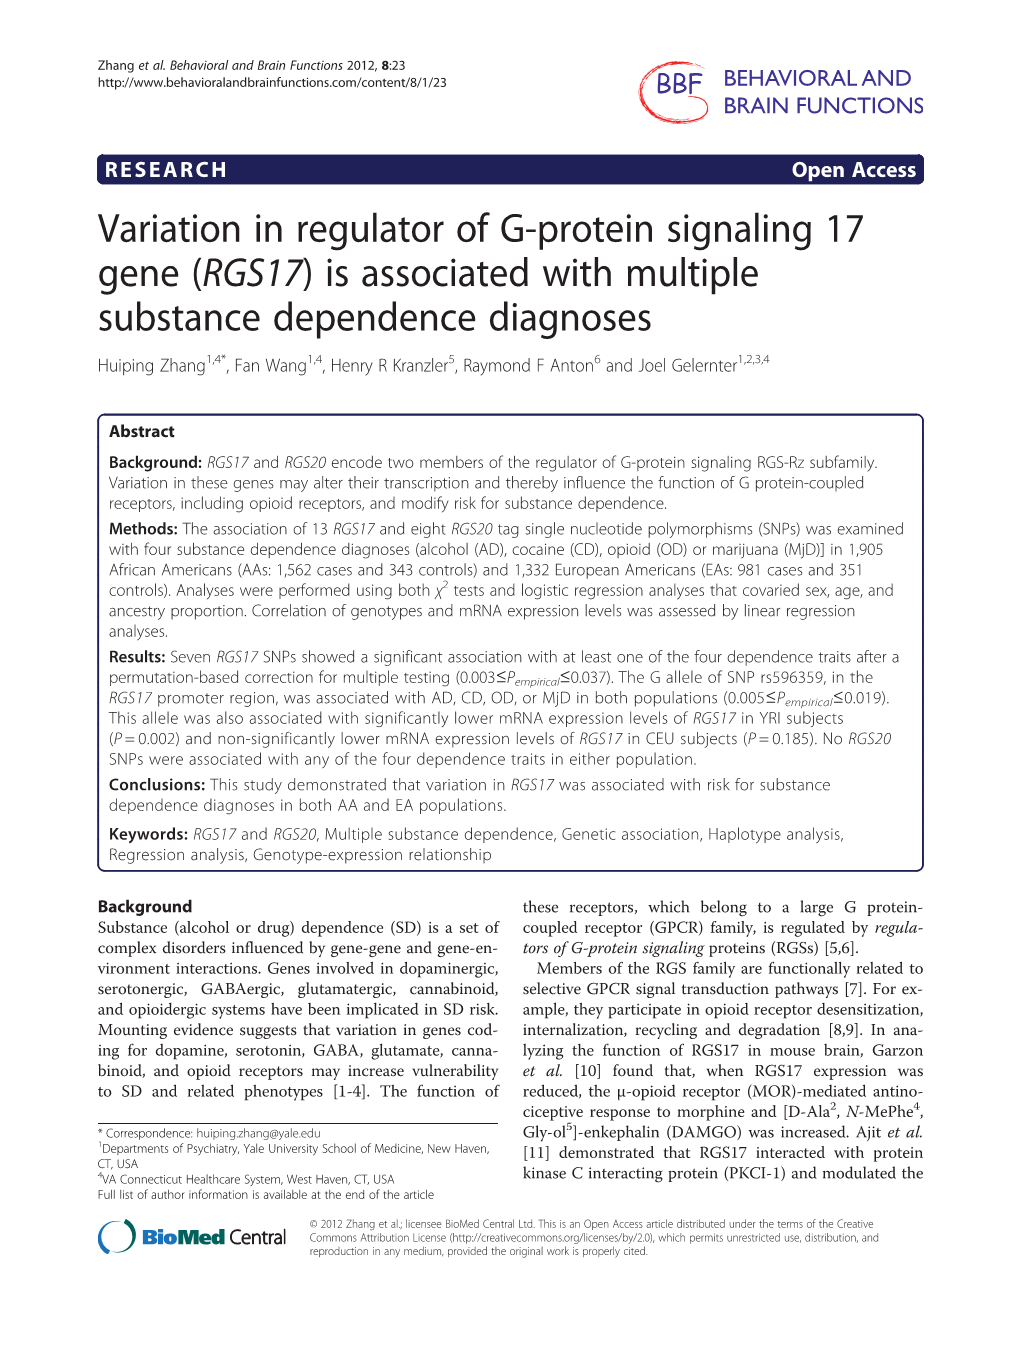 (RGS17) Is Associated with Multiple Substance Dependence Diagnoses Huiping Zhang1,4*, Fan Wang1,4, Henry R Kranzler5, Raymond F Anton6 and Joel Gelernter1,2,3,4